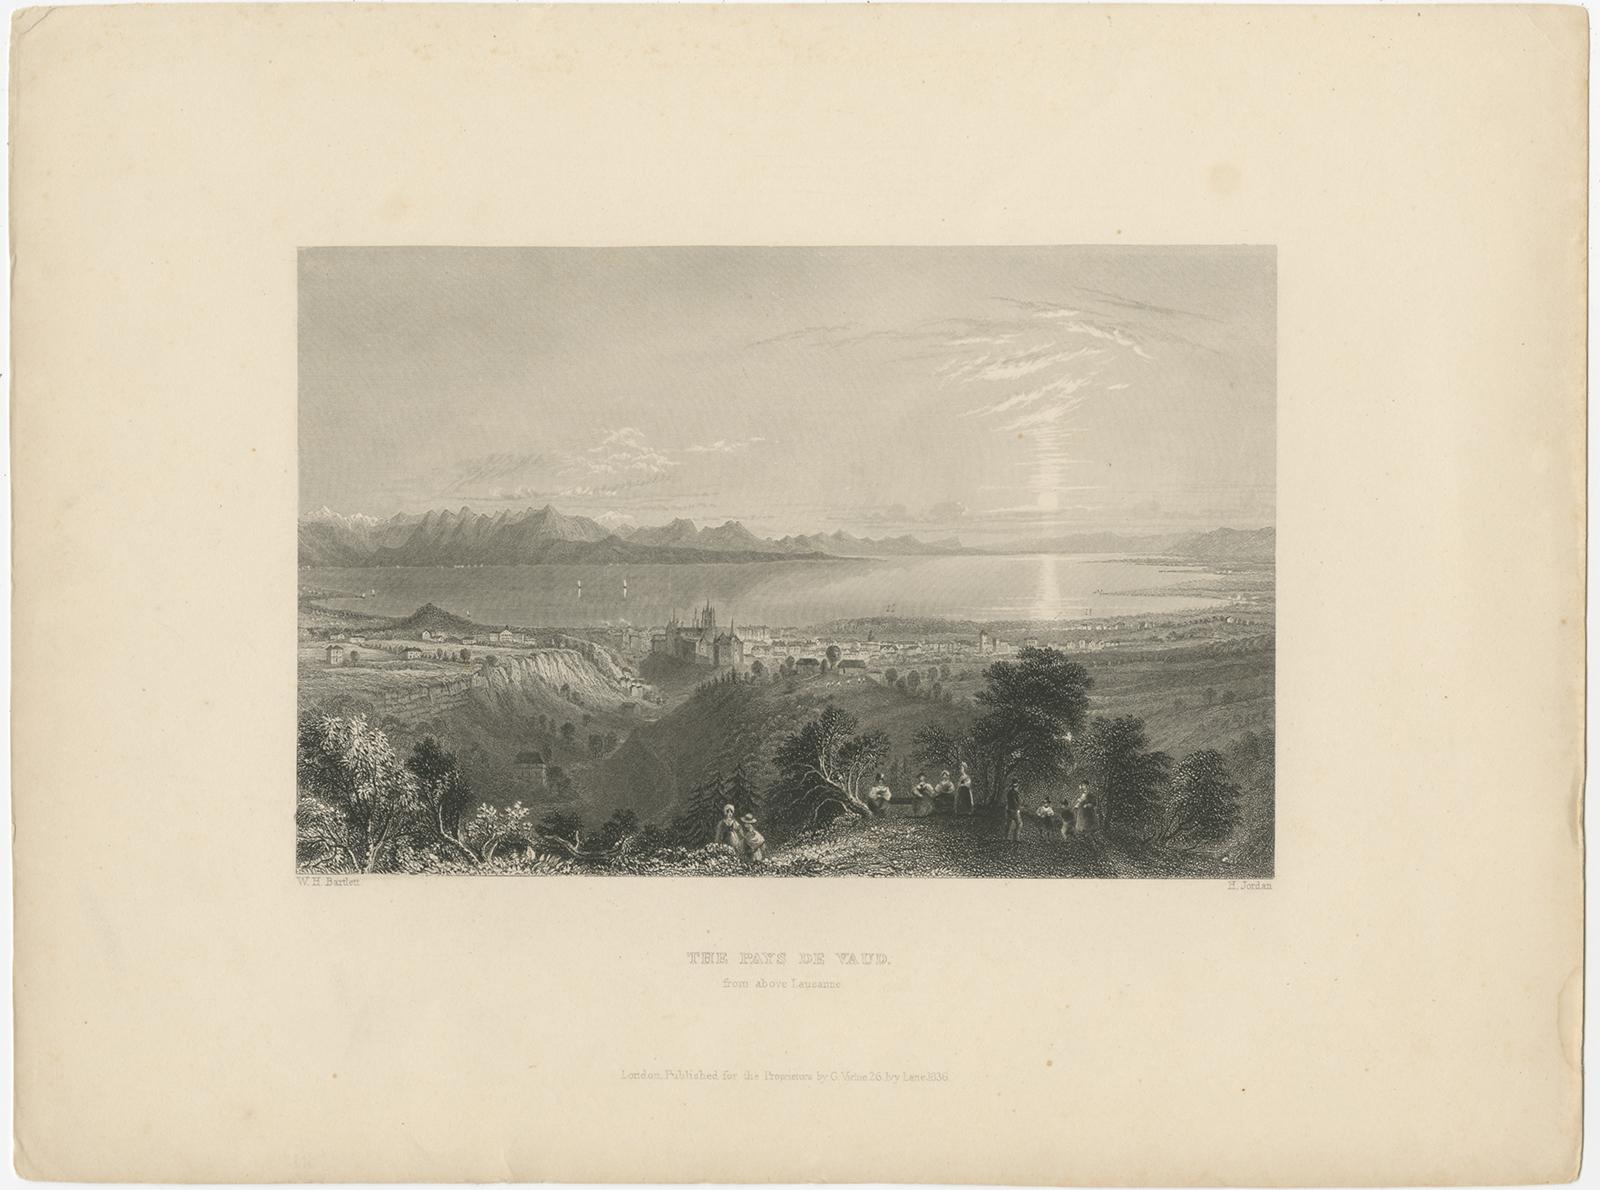 Antique print titled 'The Pays de Vaud from above Lausanne'. View of Vaud, from Lausanne, Switzerland. Overlooking the city and Lake Geneva. Originates from W. Beattie's 'Switzerland', published 1836.